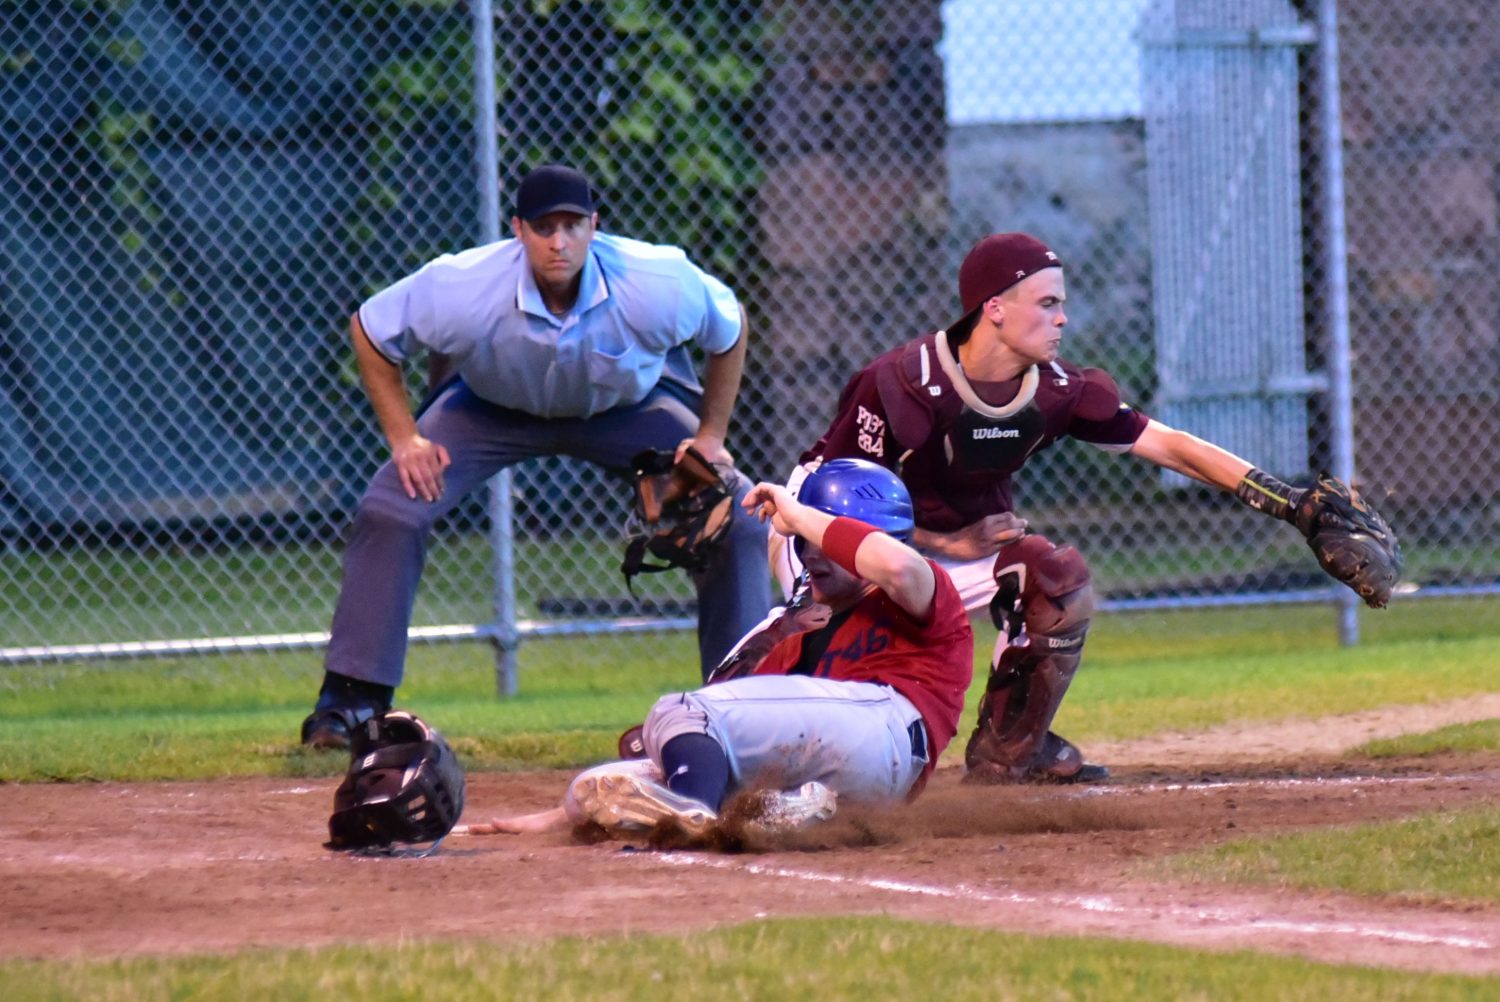 Post 46 takes teams to task in home tourney